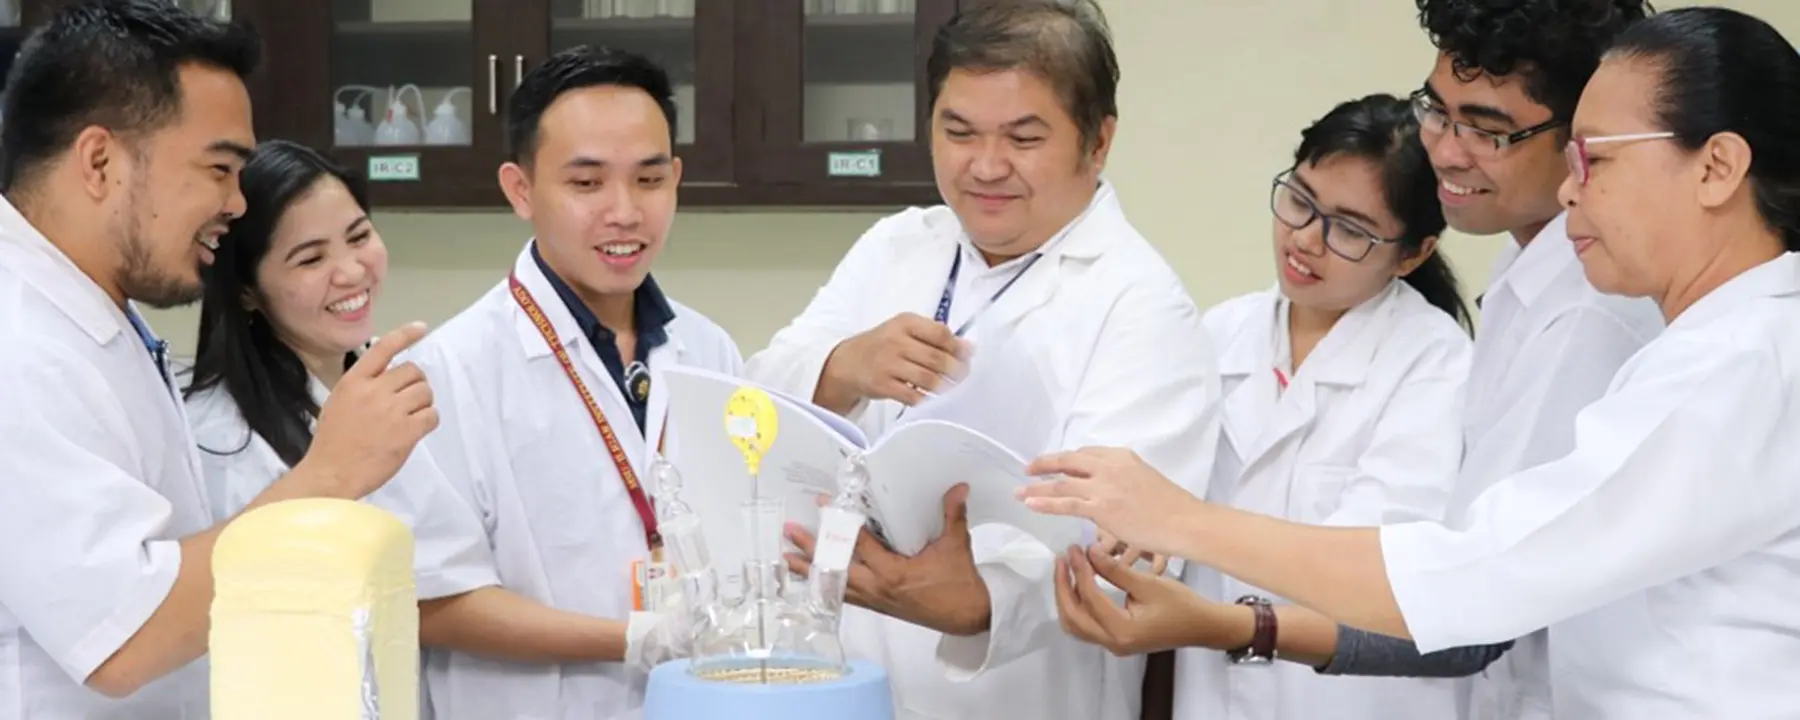 role of science and technology in philippine nation building essay